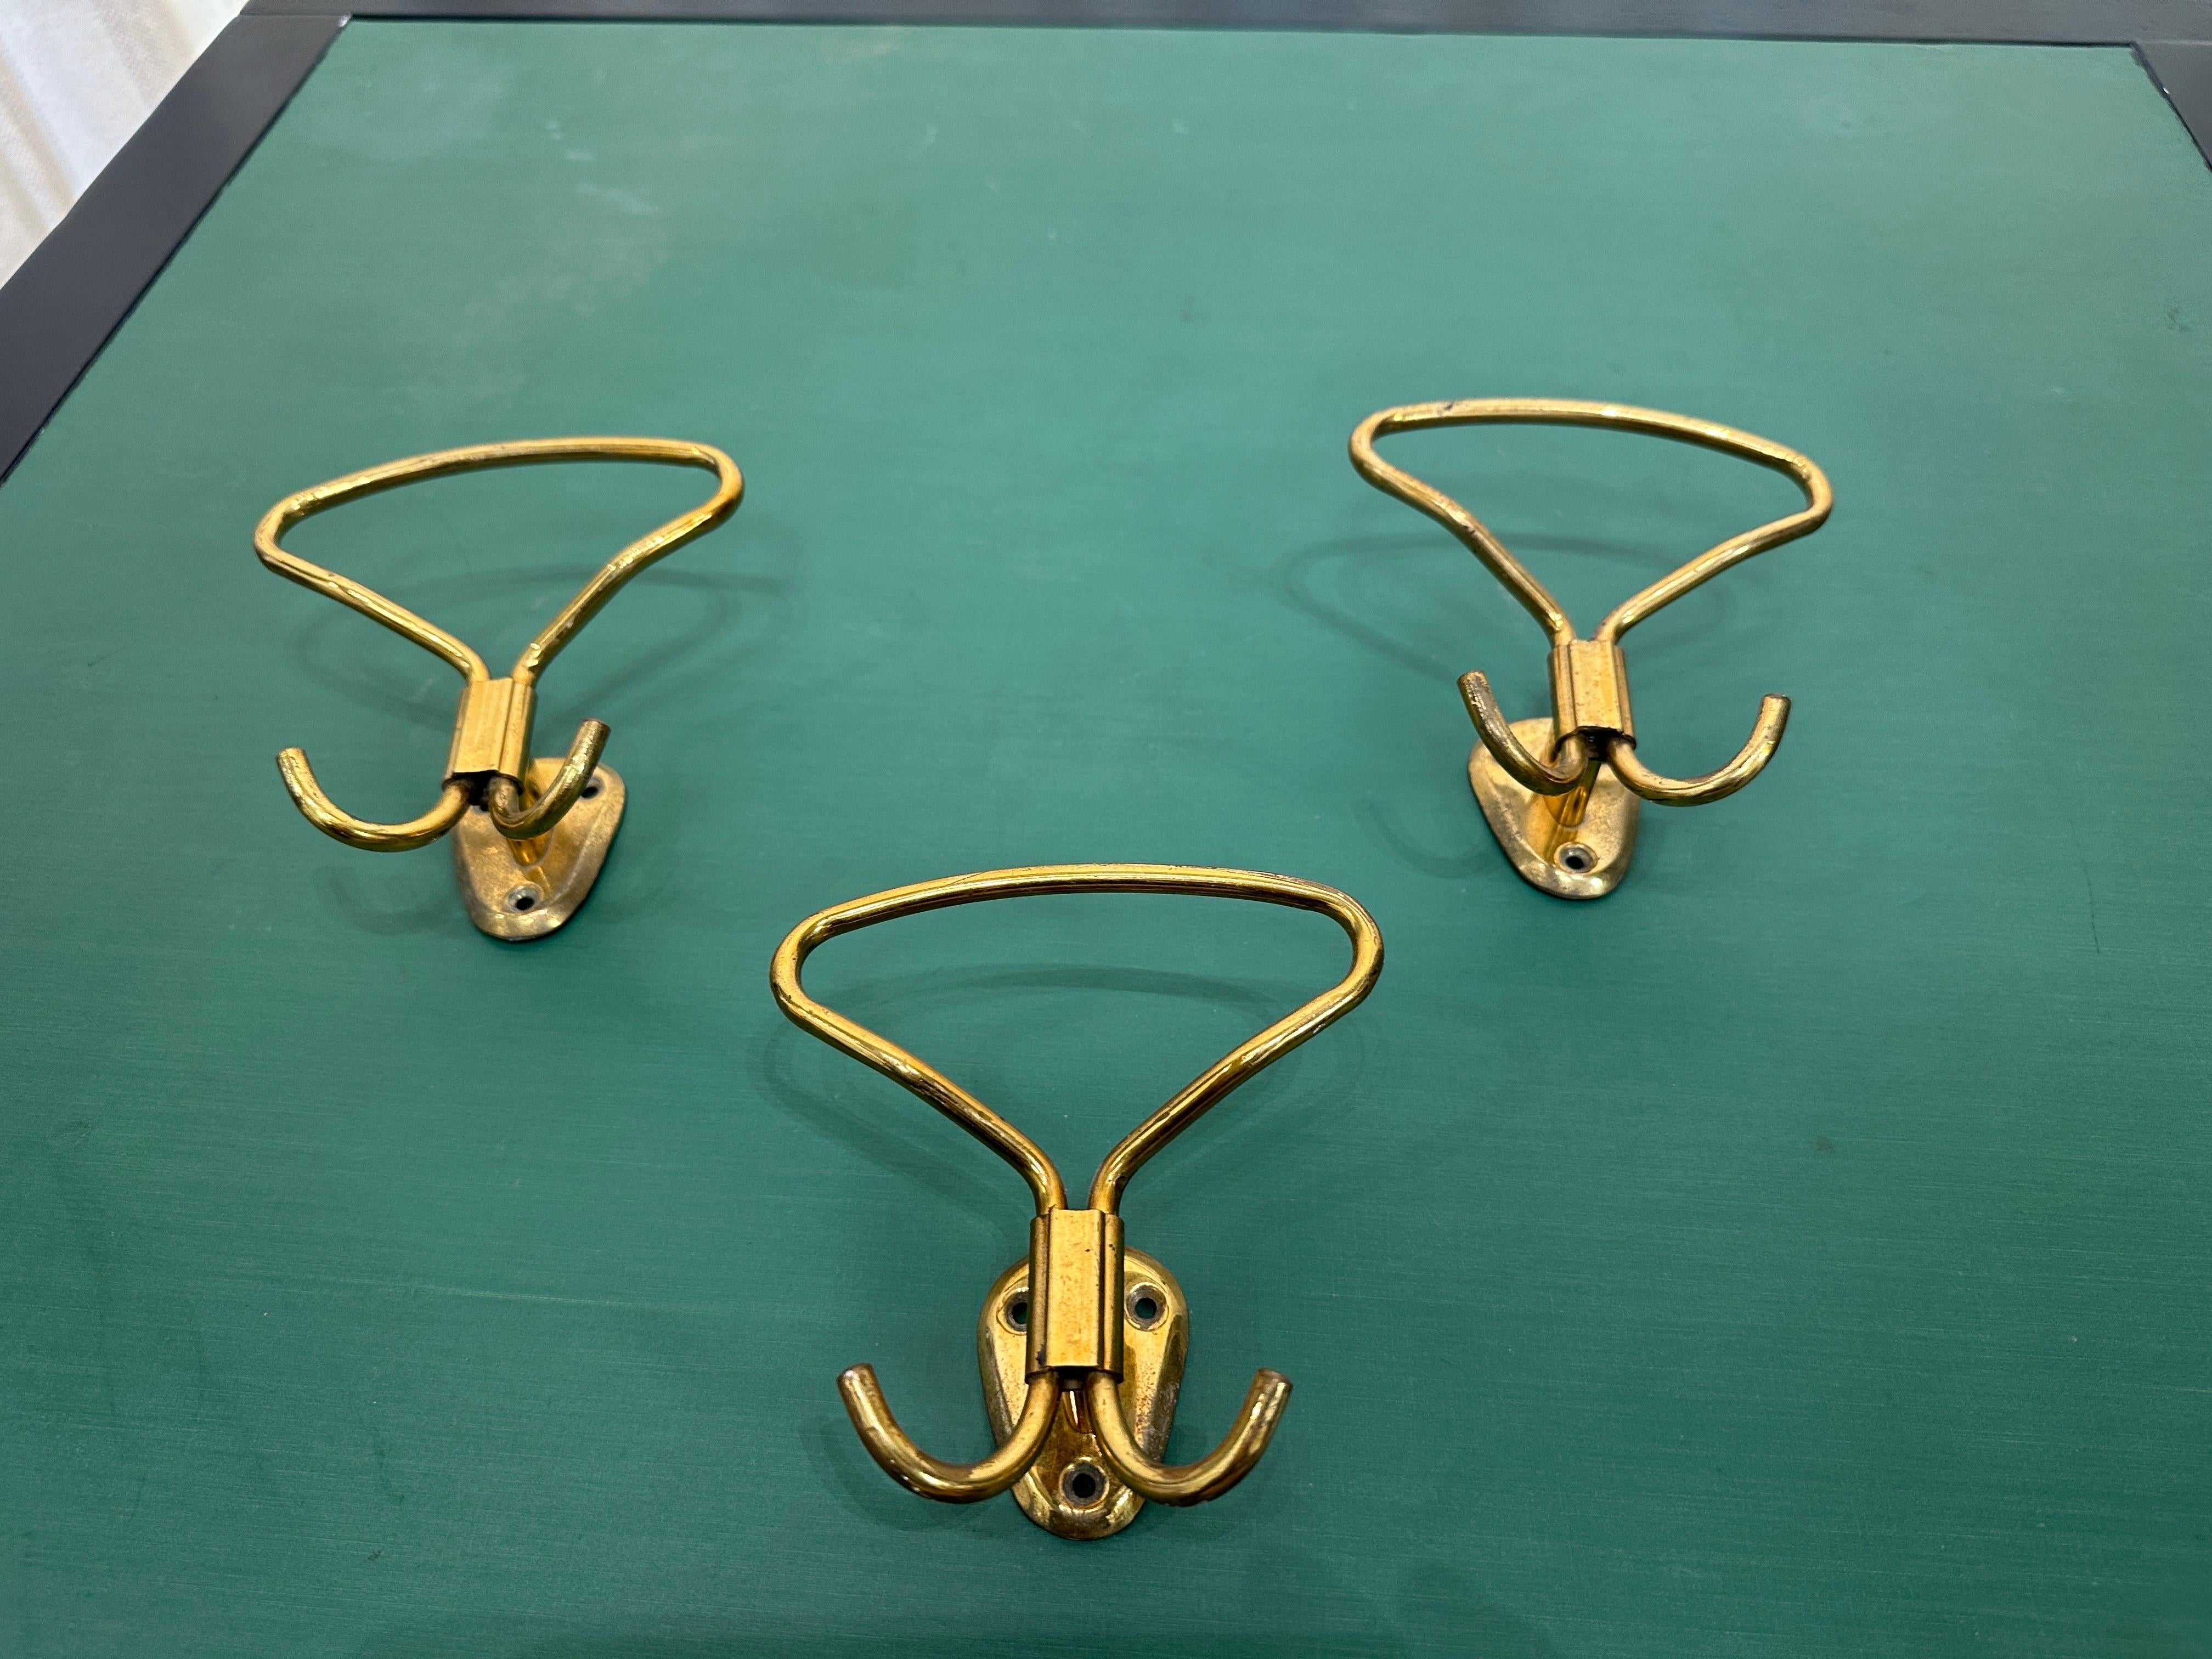 These classic mid-century design Italian wall-mounted brass hooks for coats or hats, show the simplicity yet chic Italian flare.  Perfect for any room, mud-room, foyer, bathroom, kitchen, etc.